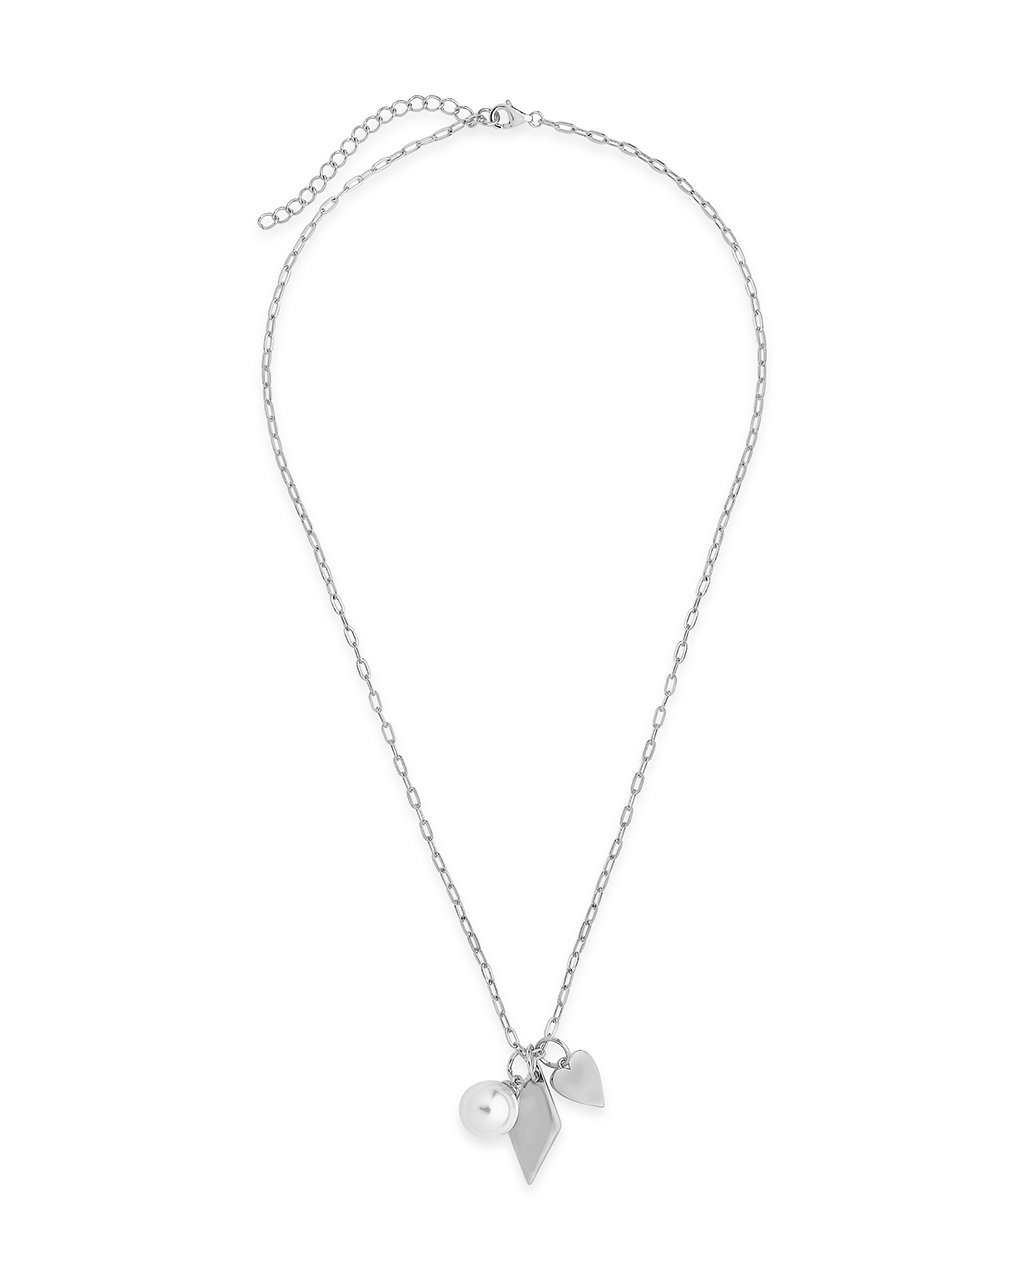 Delicate Sterling Silver Pearl & Charm Chain Necklace Necklace Sterling Forever 